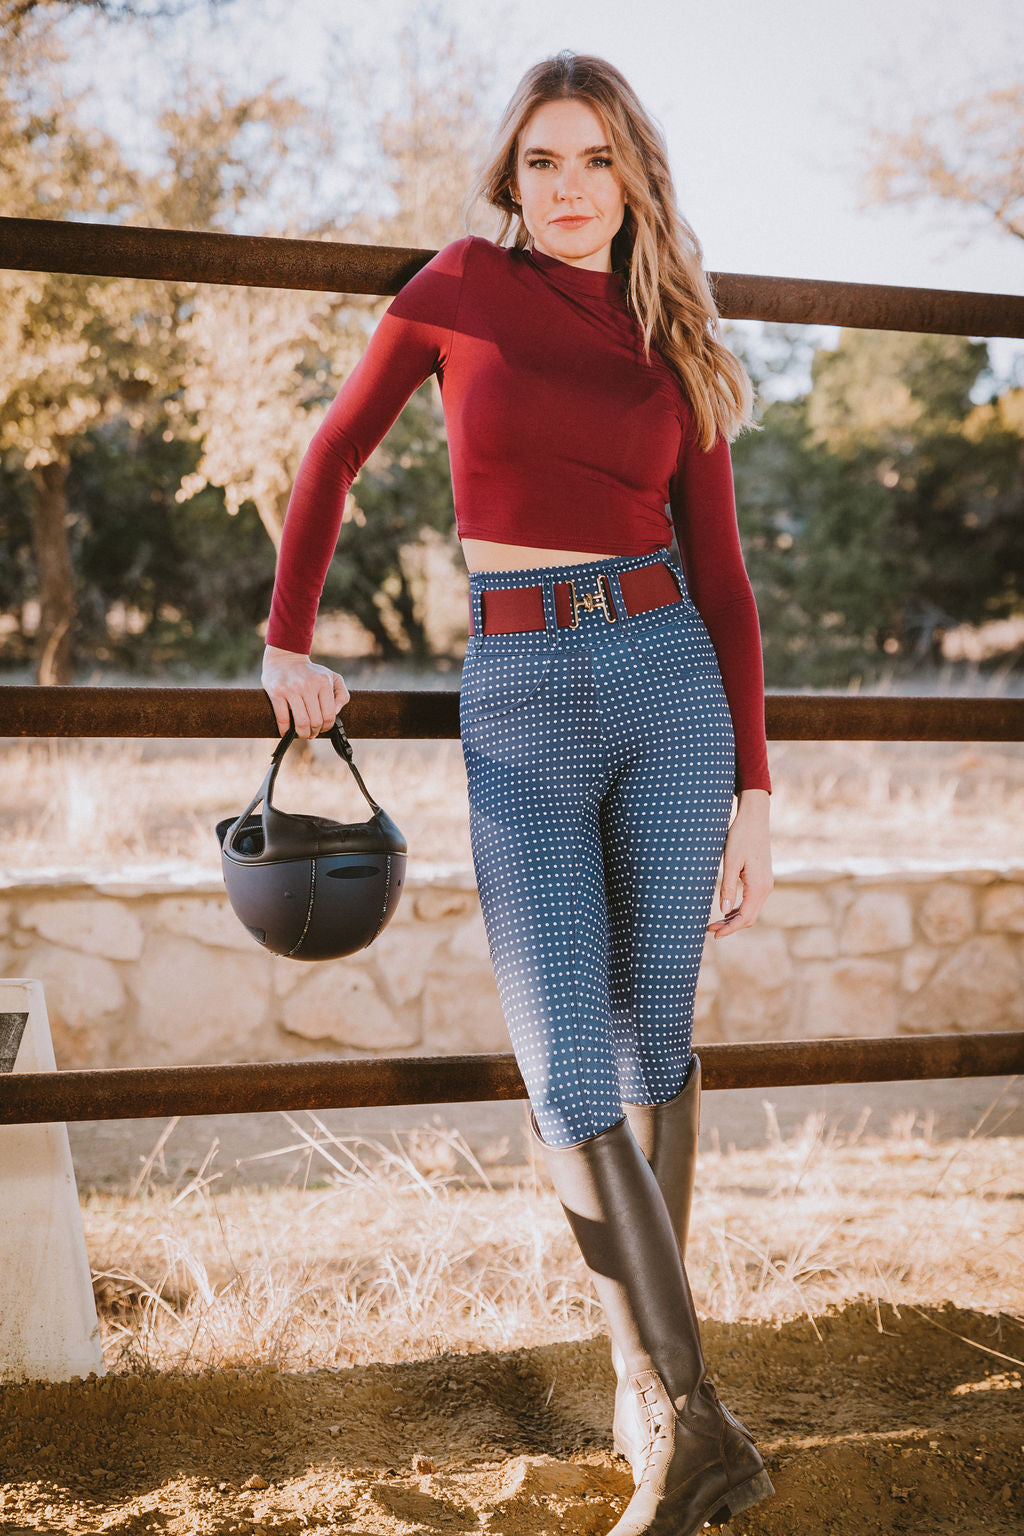 Canter Culture's breeches are the most comfortable riding pant featuring a high waist and real belt loops.